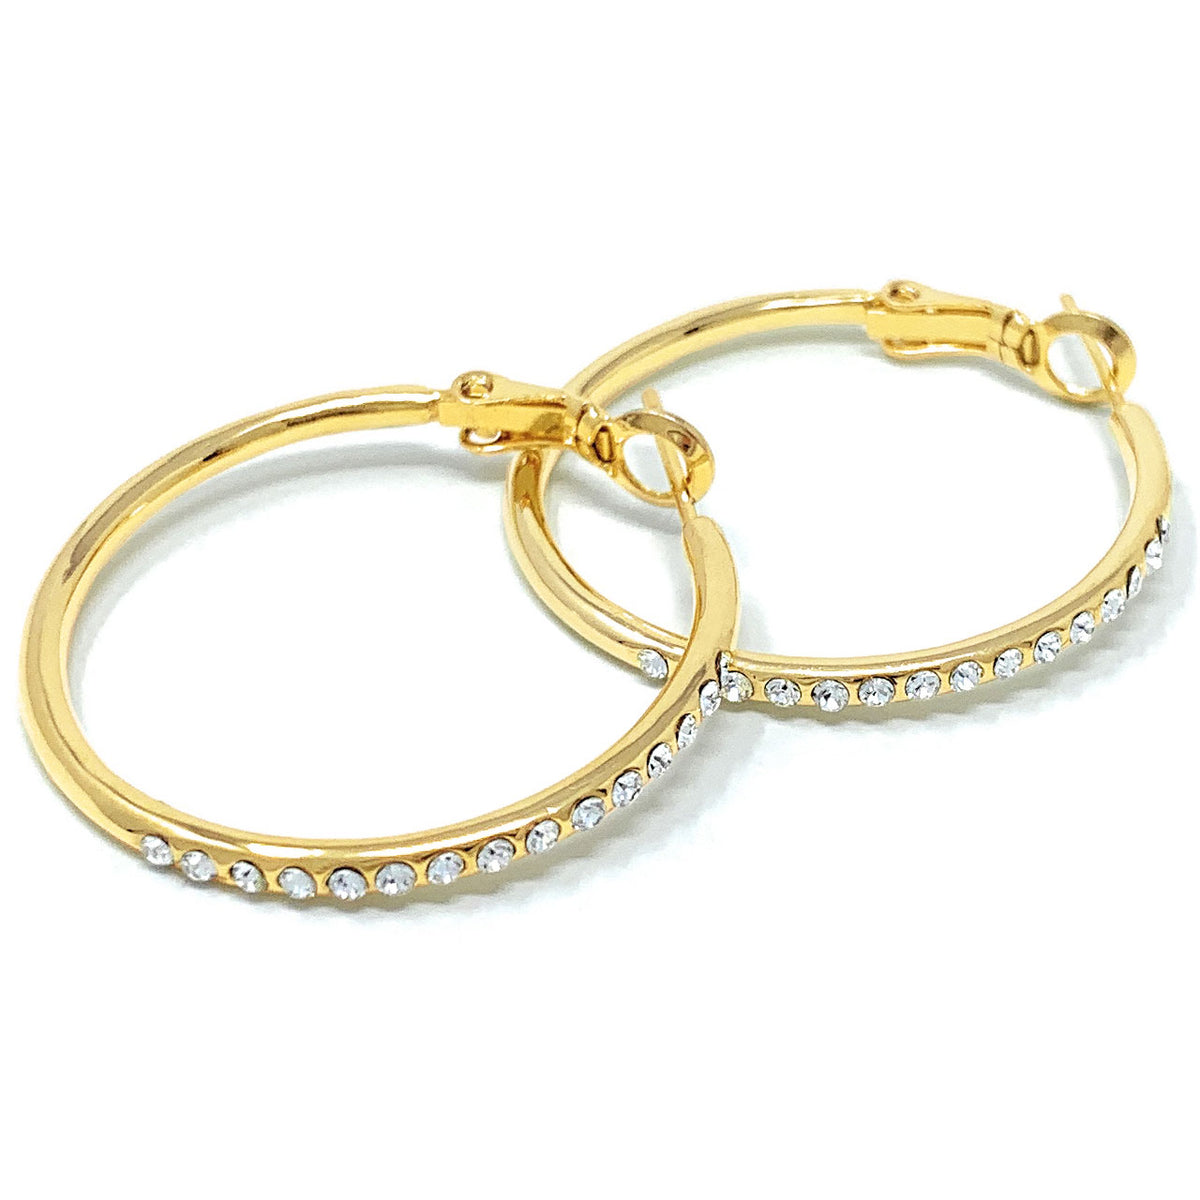 Amelia Small Pave Hoop Earrings with White Clear Round Crystals from Swarovski Gold Plated - Ed Heart